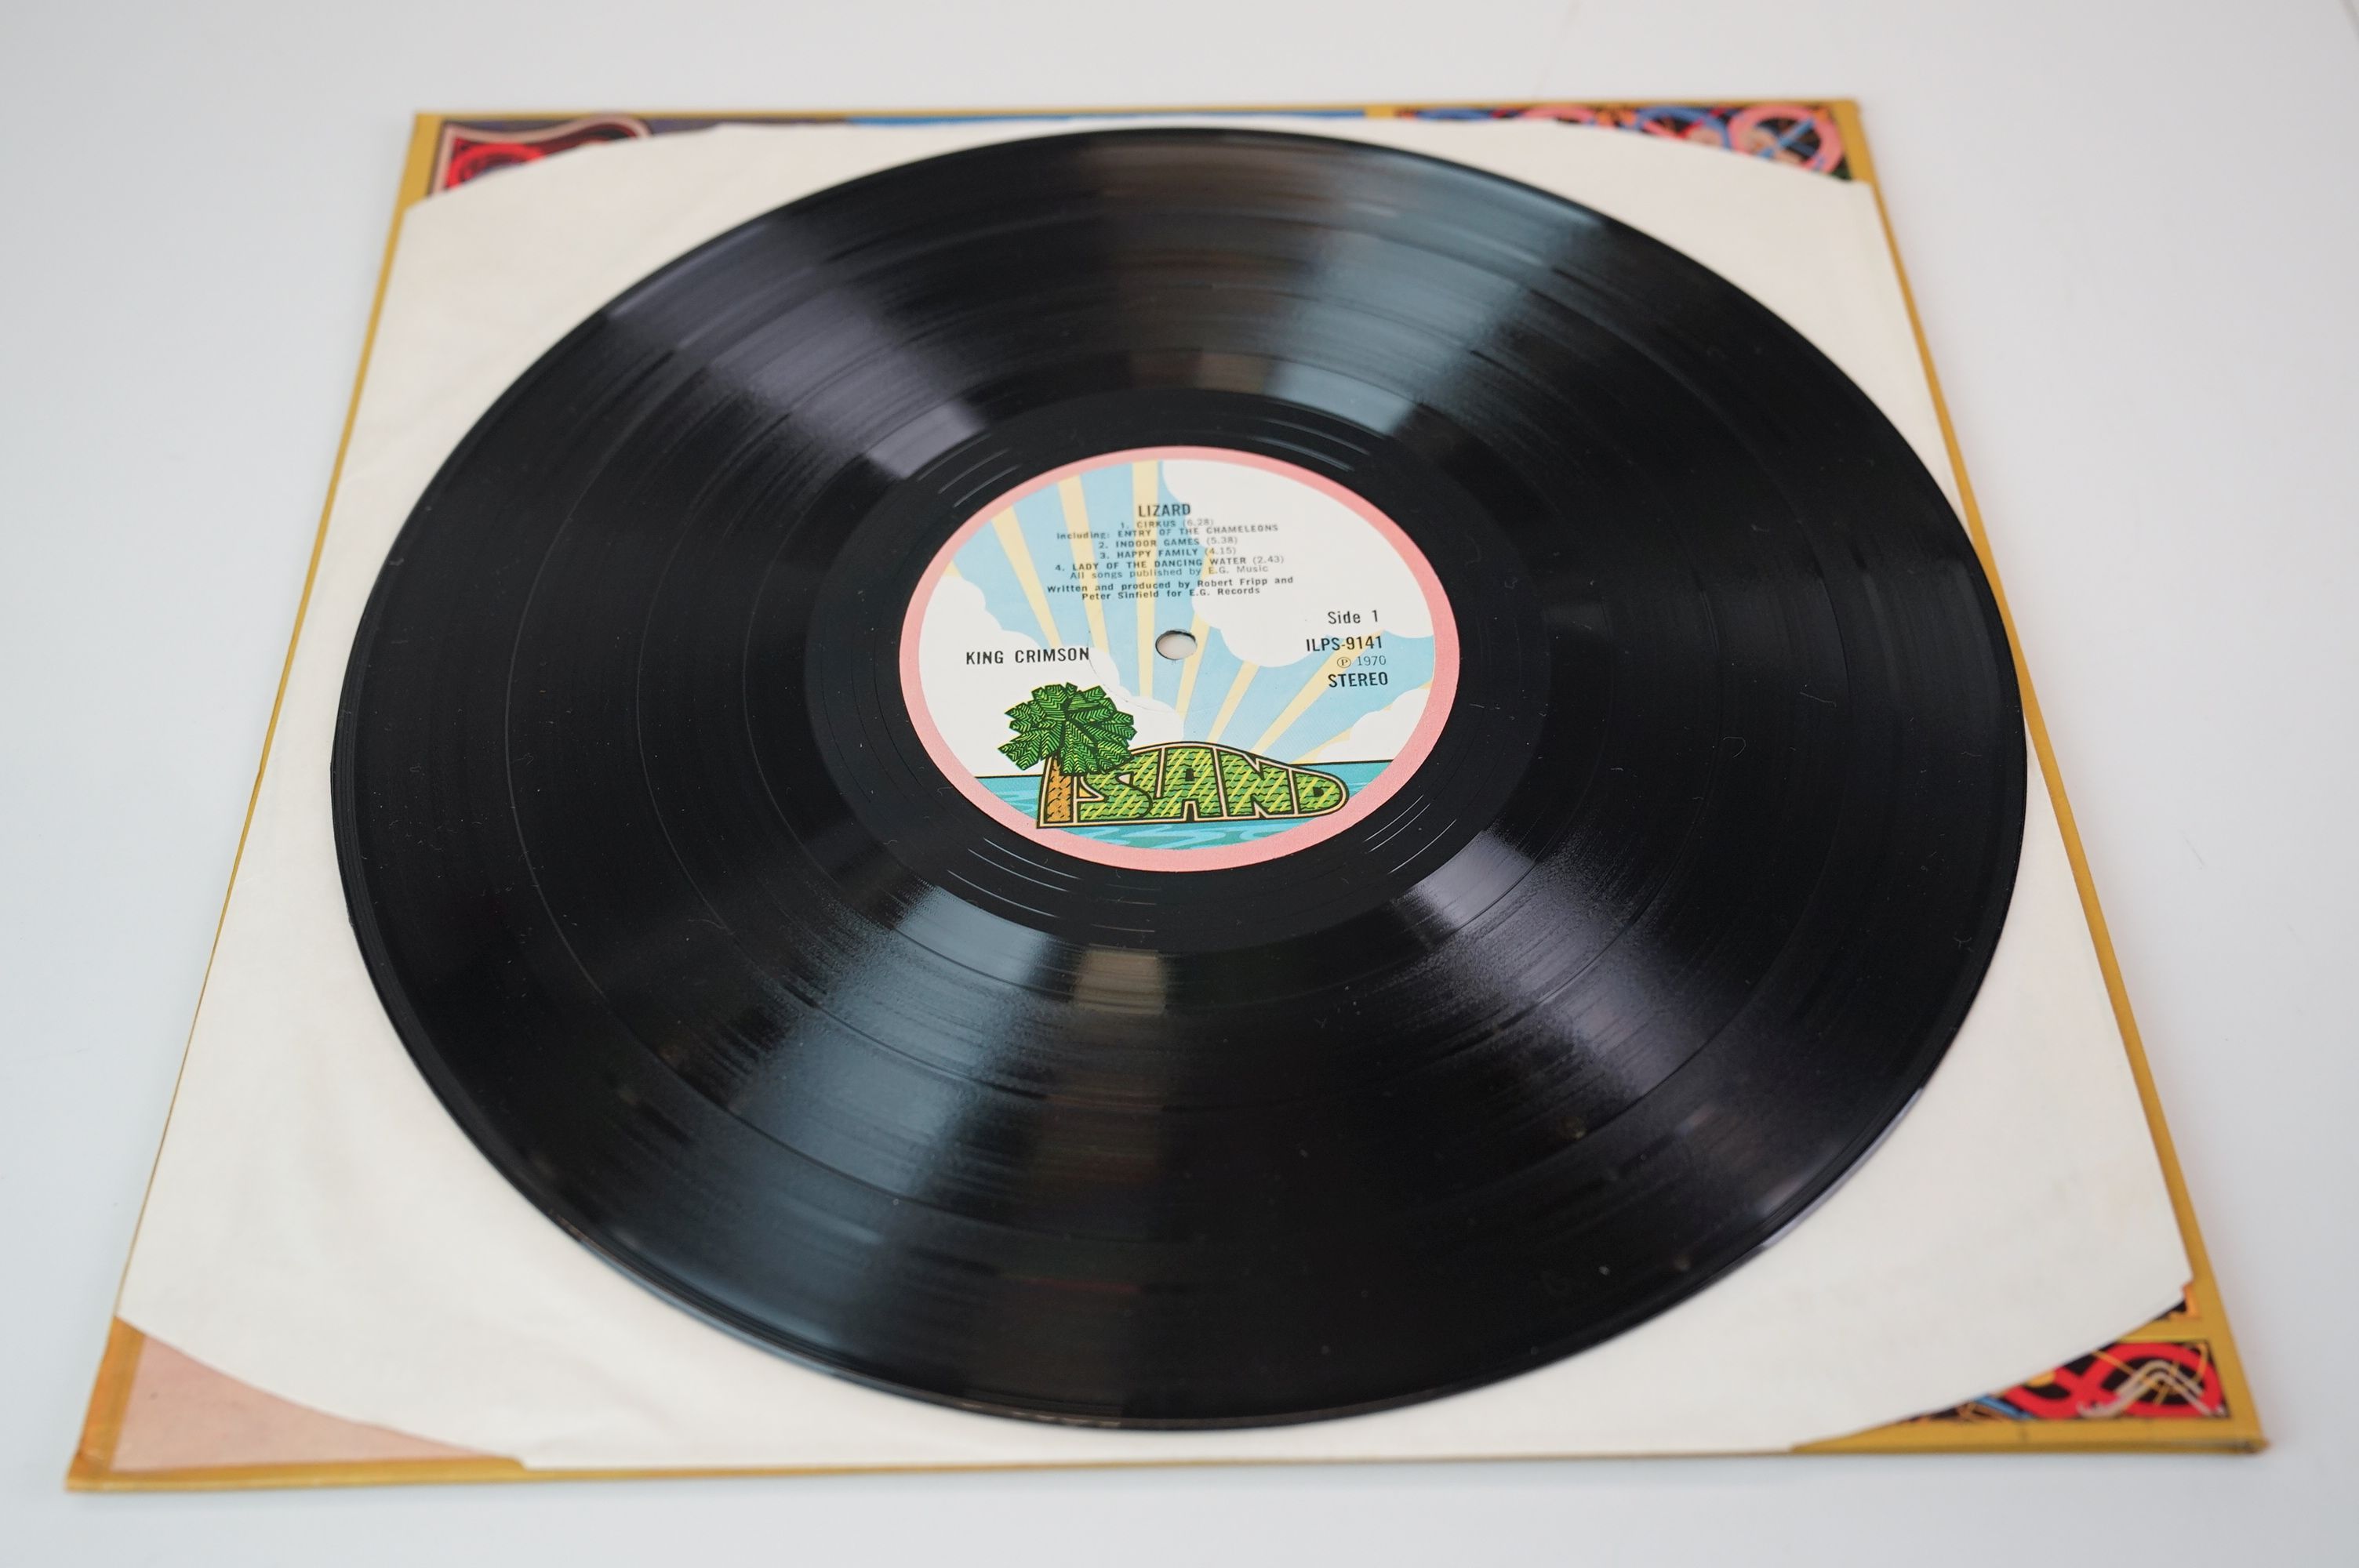 Vinyl - Two King Crimson LPs to include Lizard on Island ILPS9141 laminated gatefiold sleeve and - Image 6 of 13